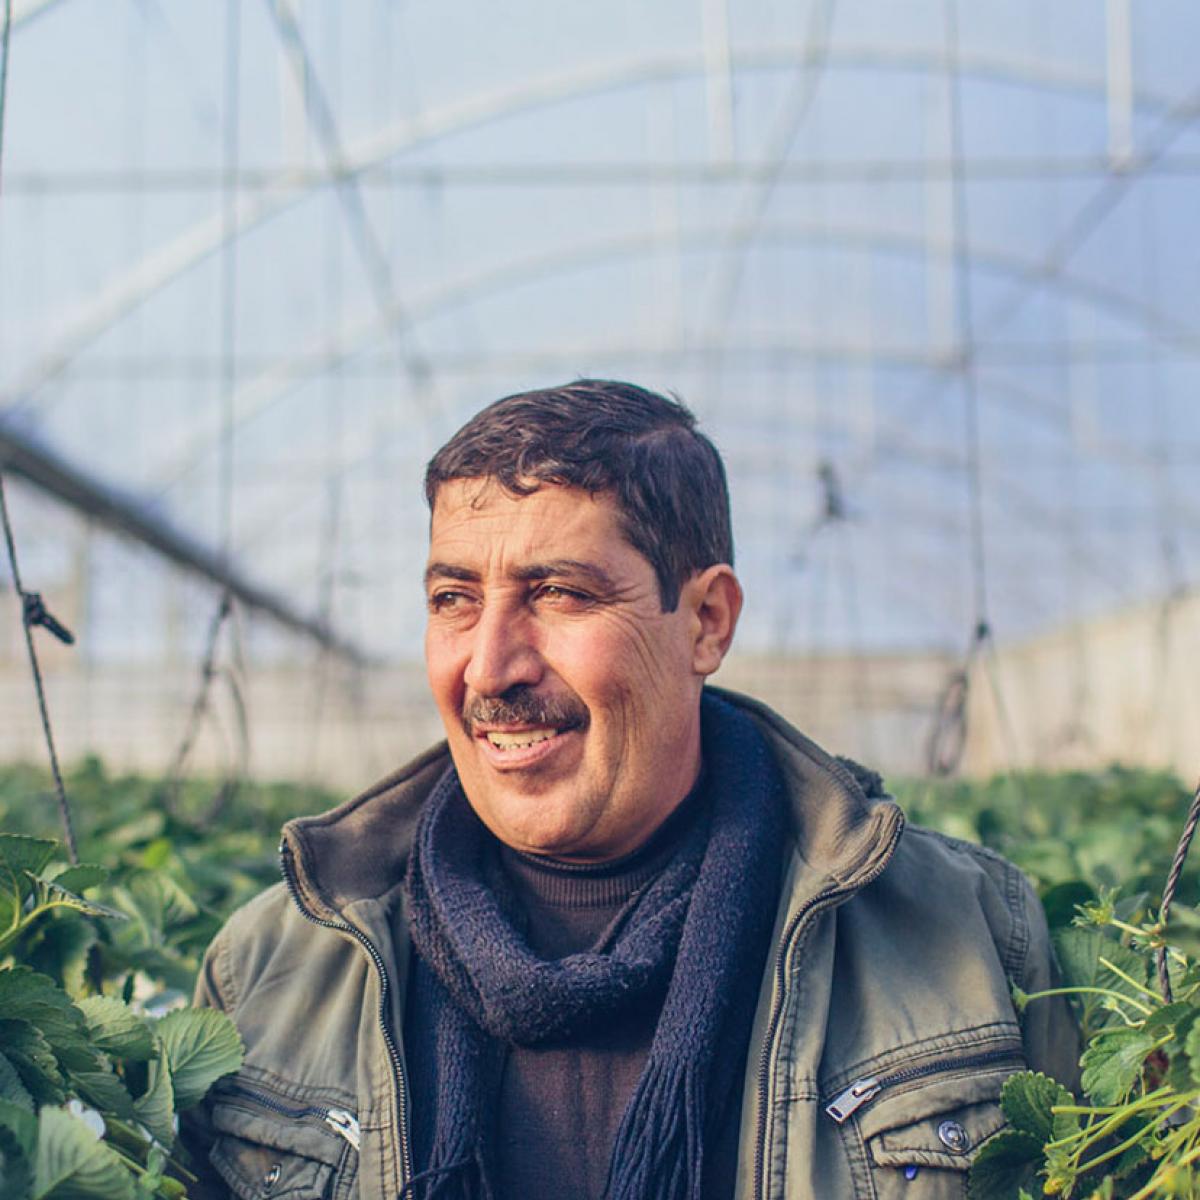 Osama Abu Al-Rub, smiles as he stands in his strawberry fields on his farm in Qabatiya, in Jenin Governorate, Palestine.